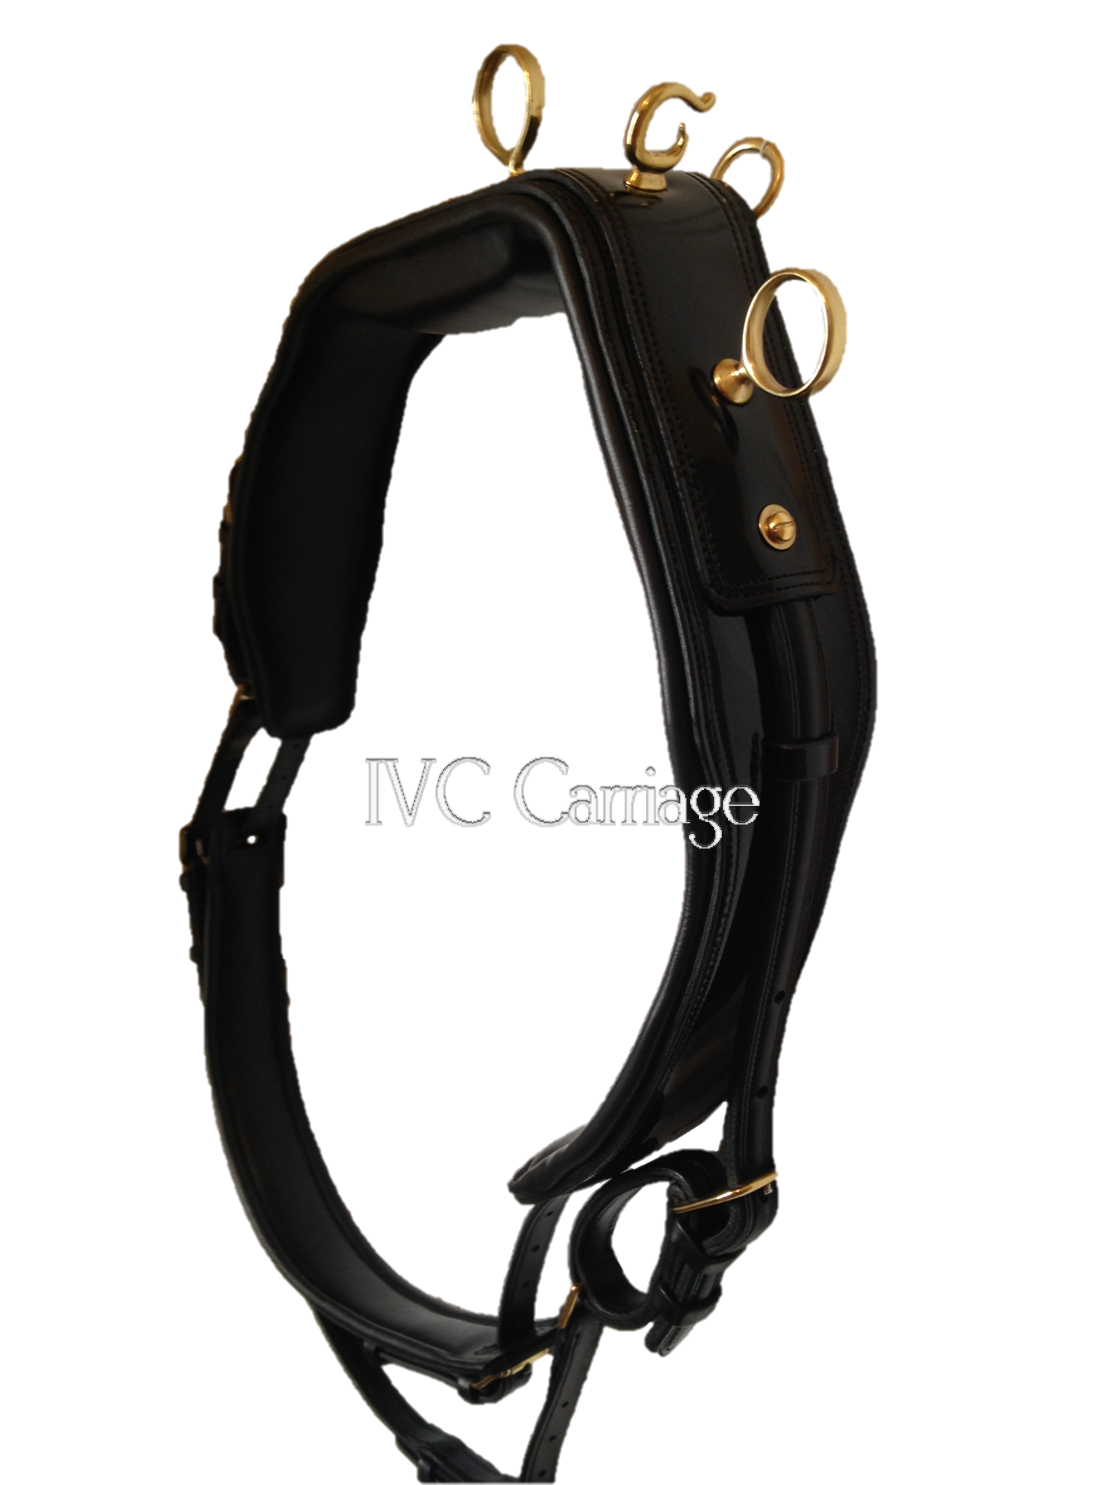 IVC Elite Leather Horse Harness Saddle | IVC Carriage